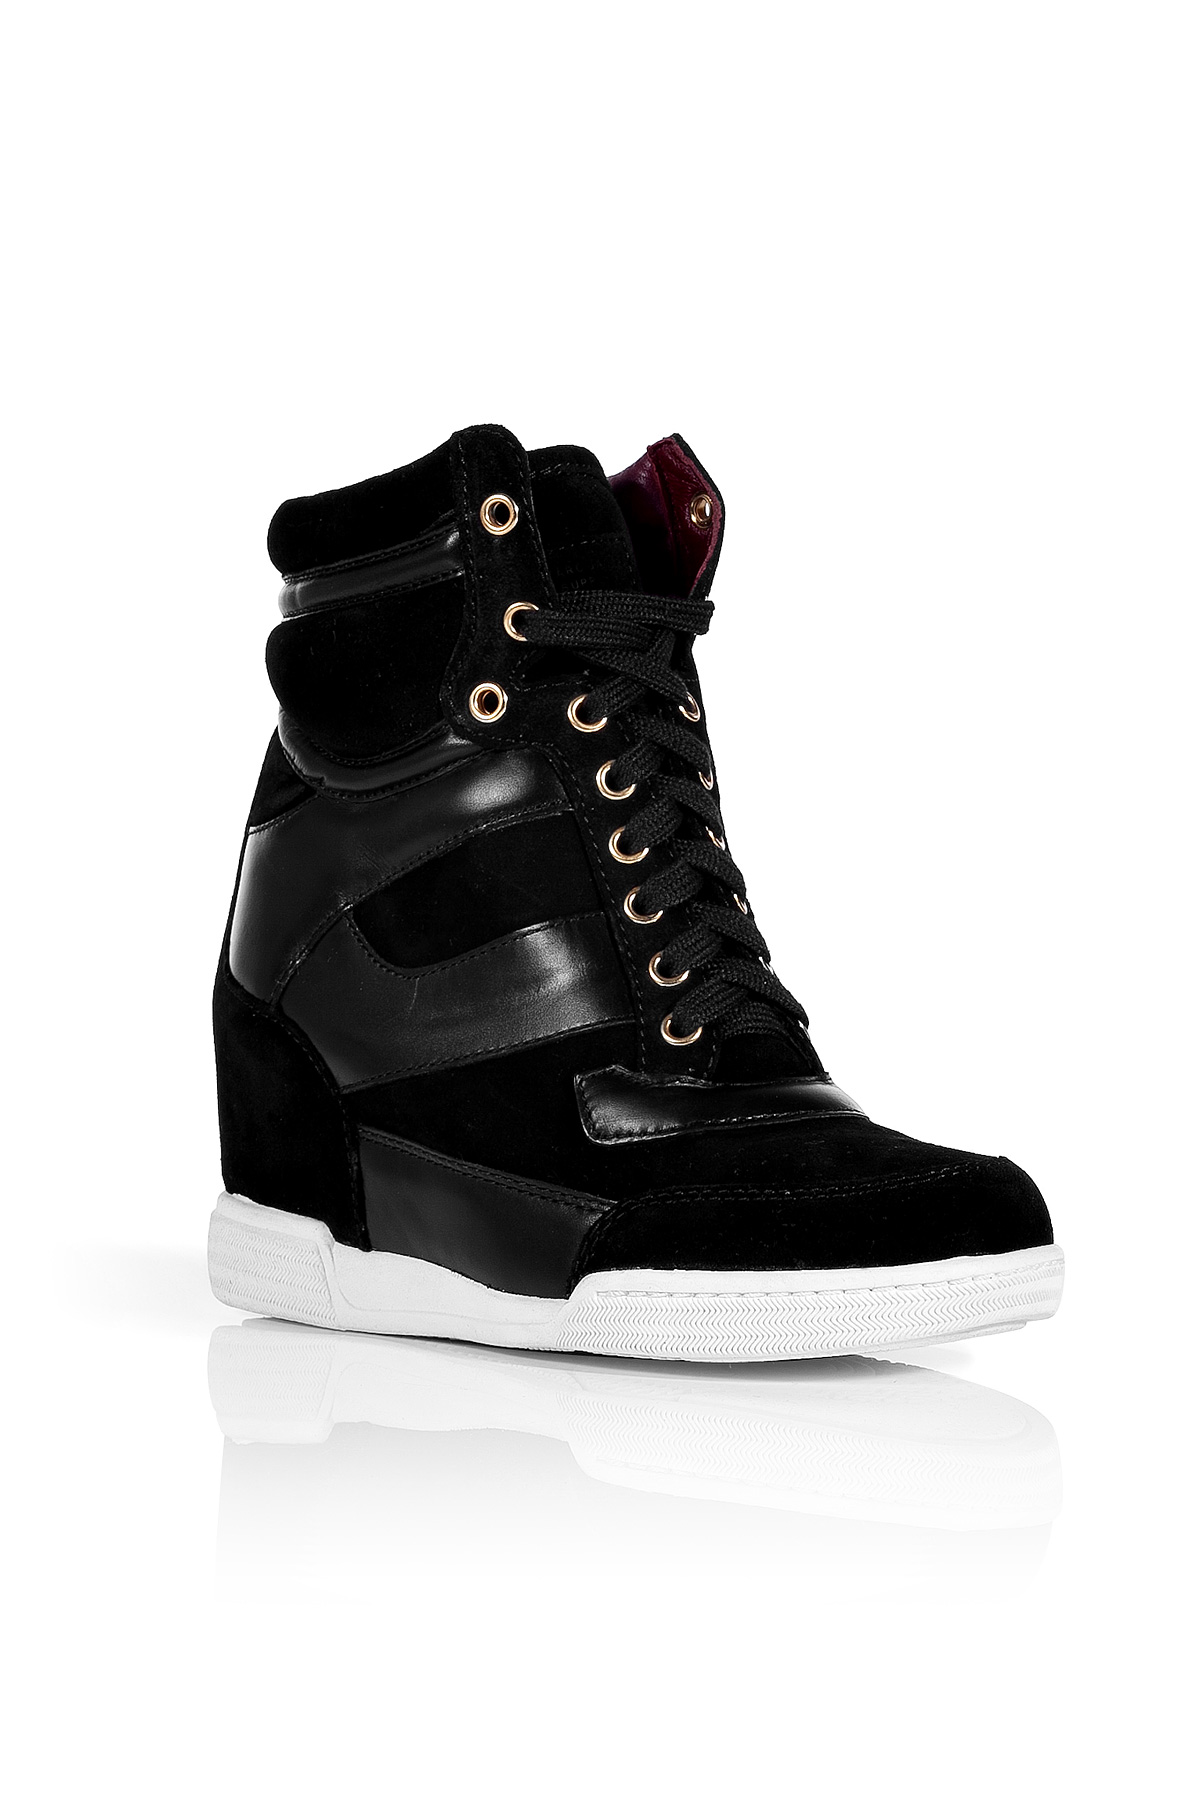 hot topic open toed black wedge sneakers